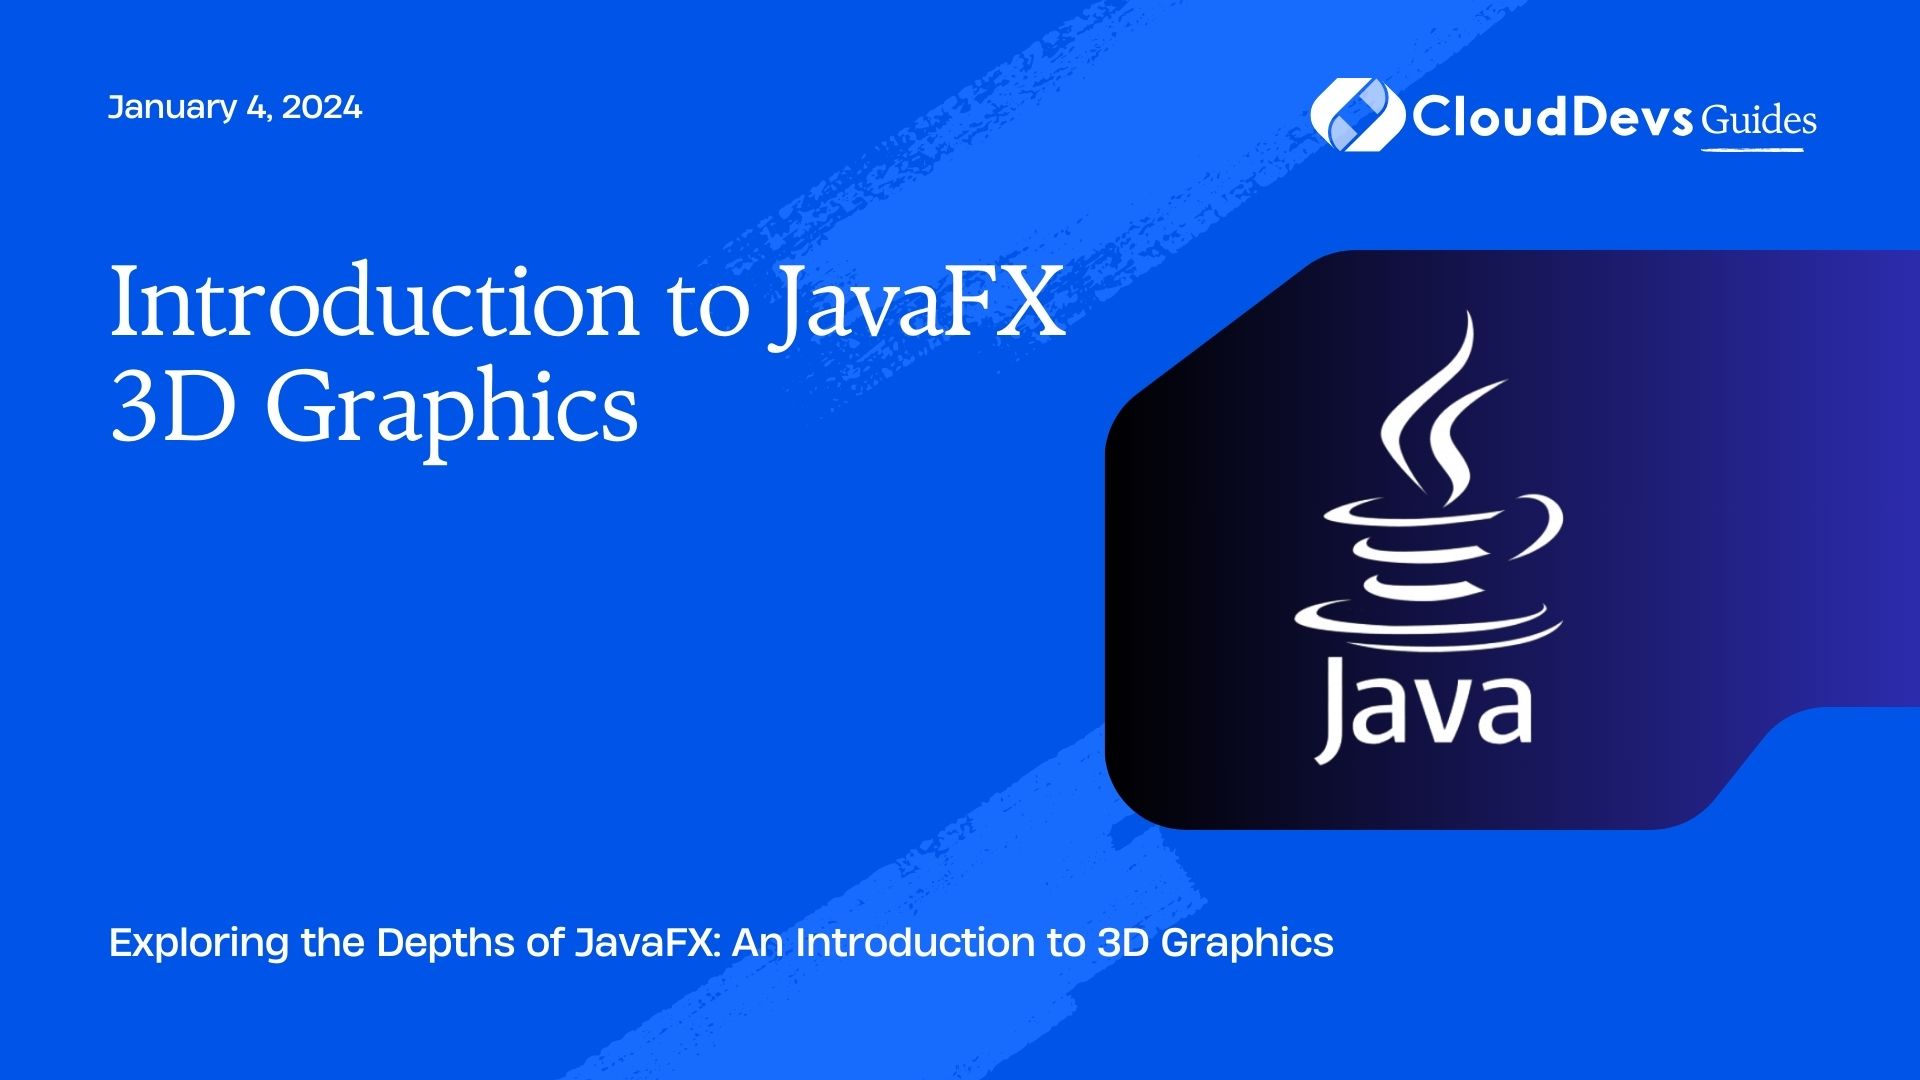 Introduction to JavaFX 3D Graphics